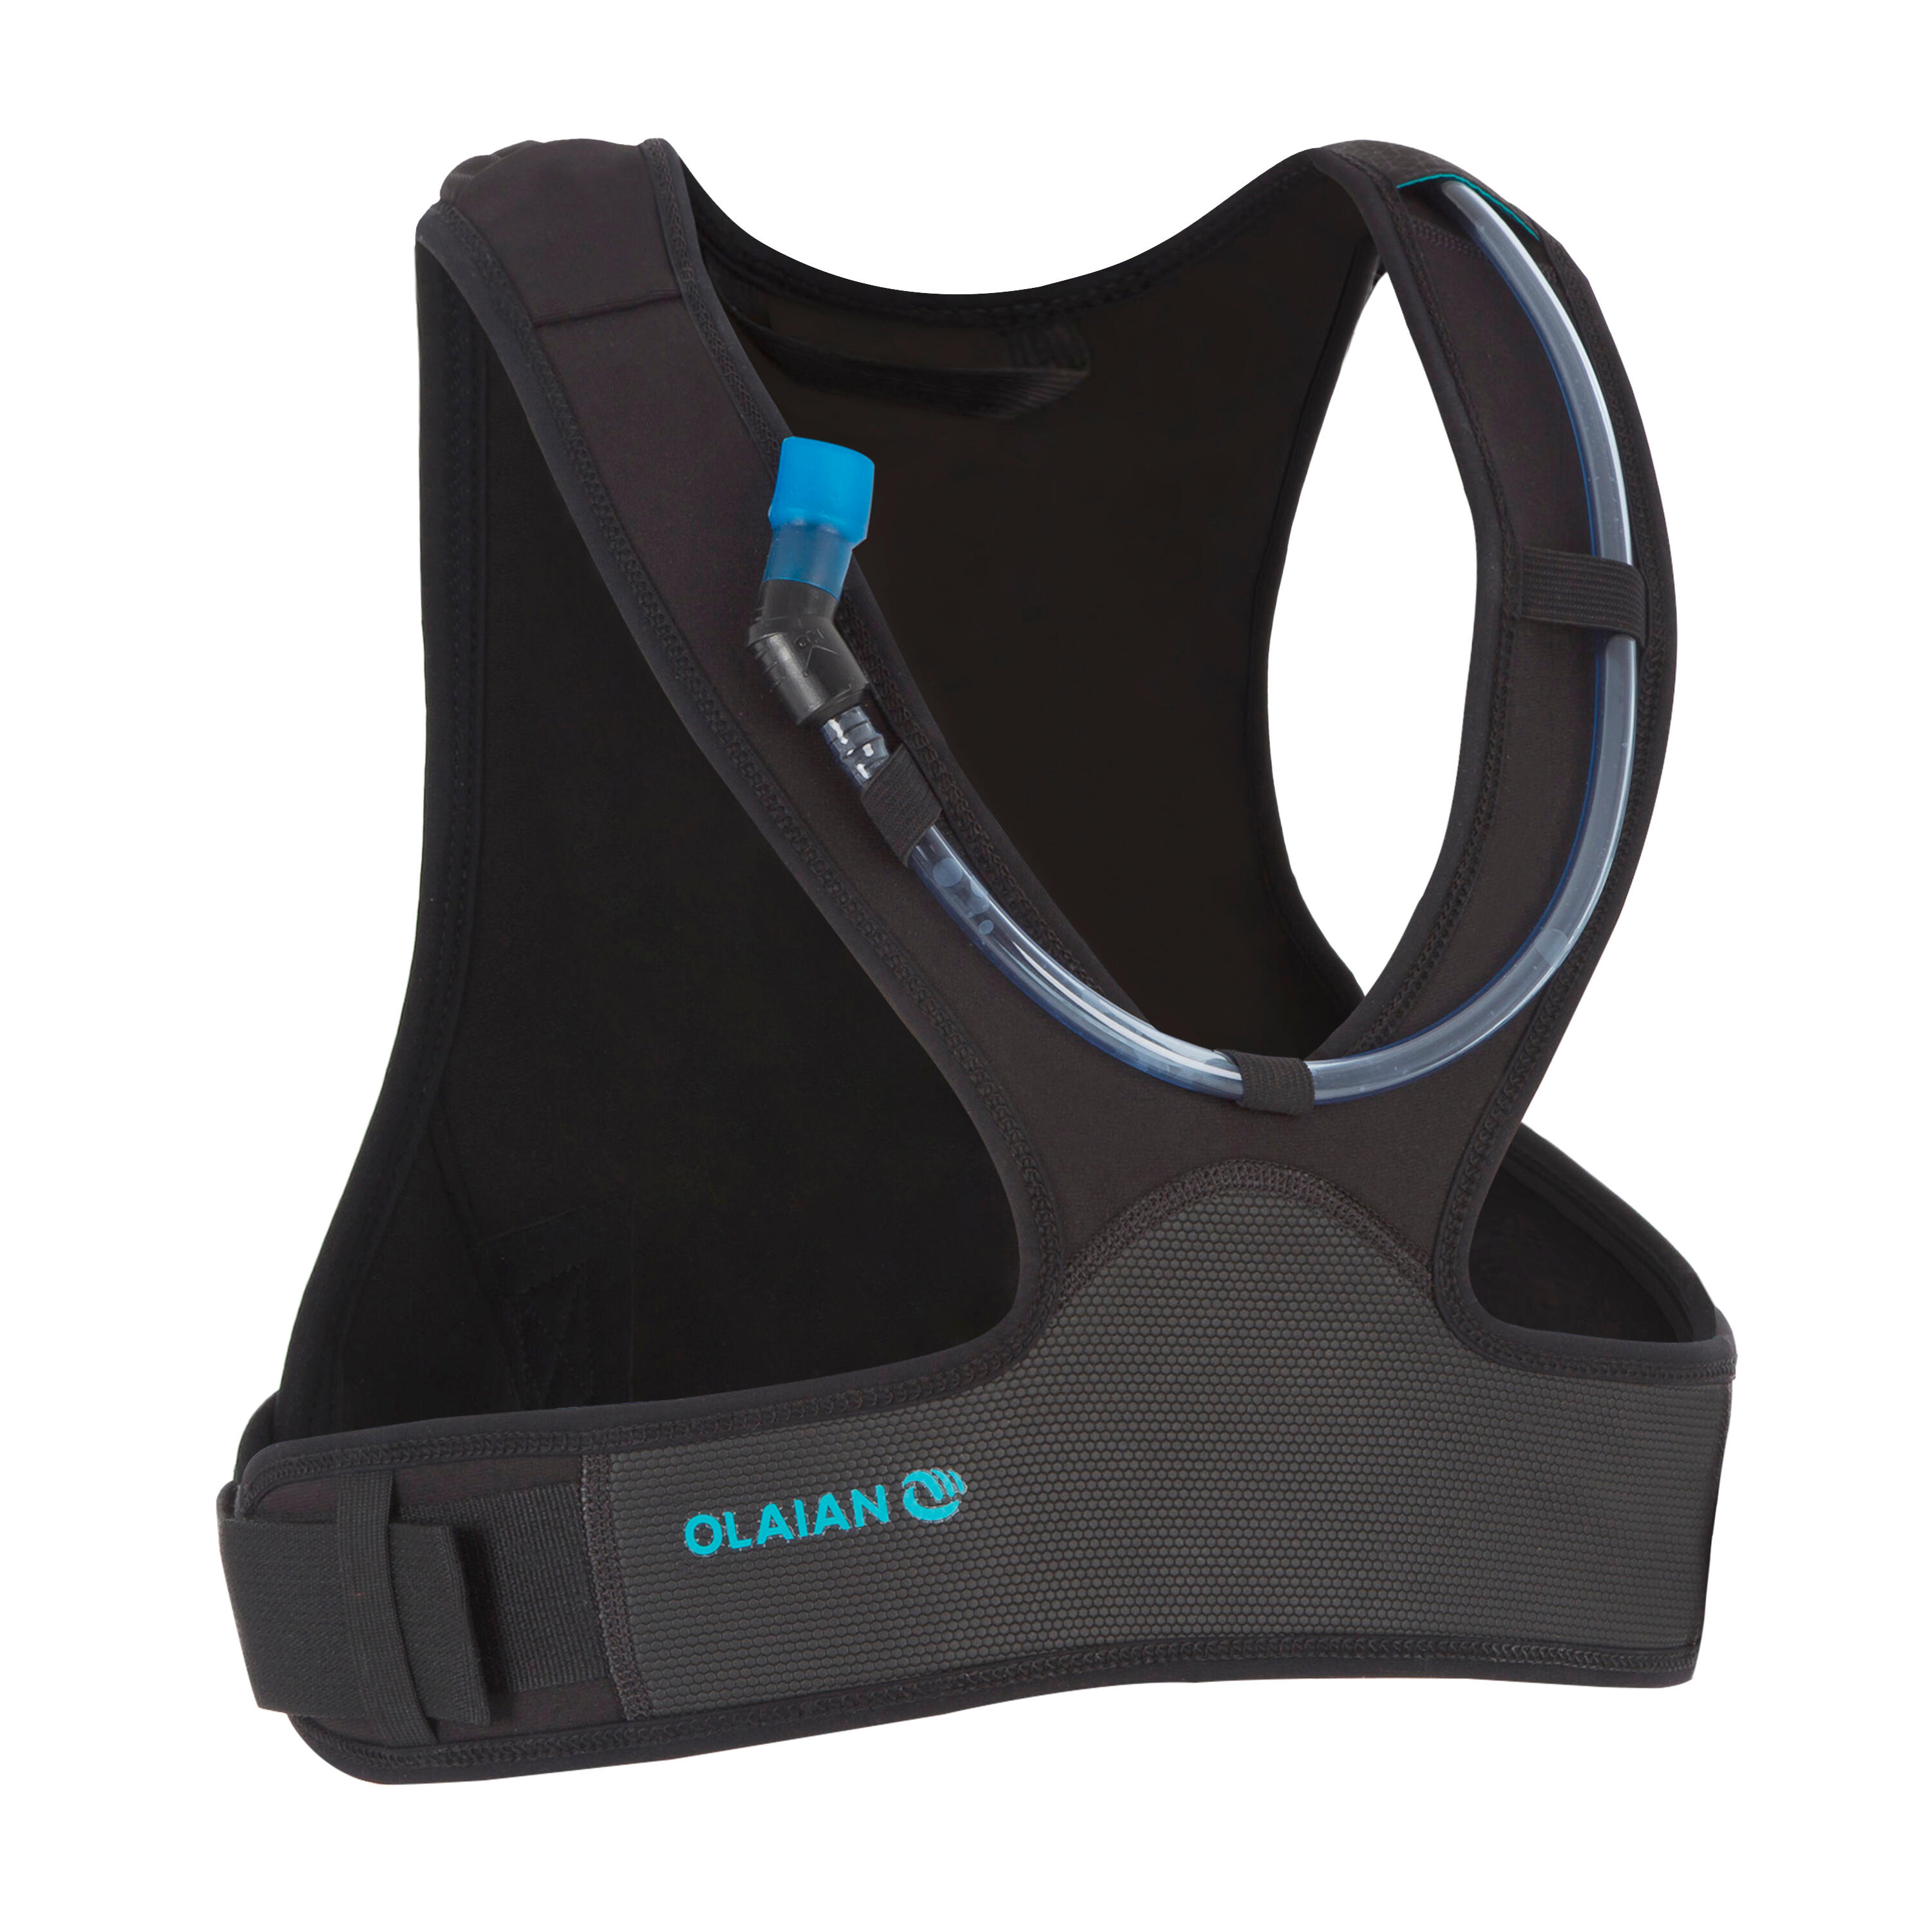 OLAIAN 1 L Surfing Water Pouch